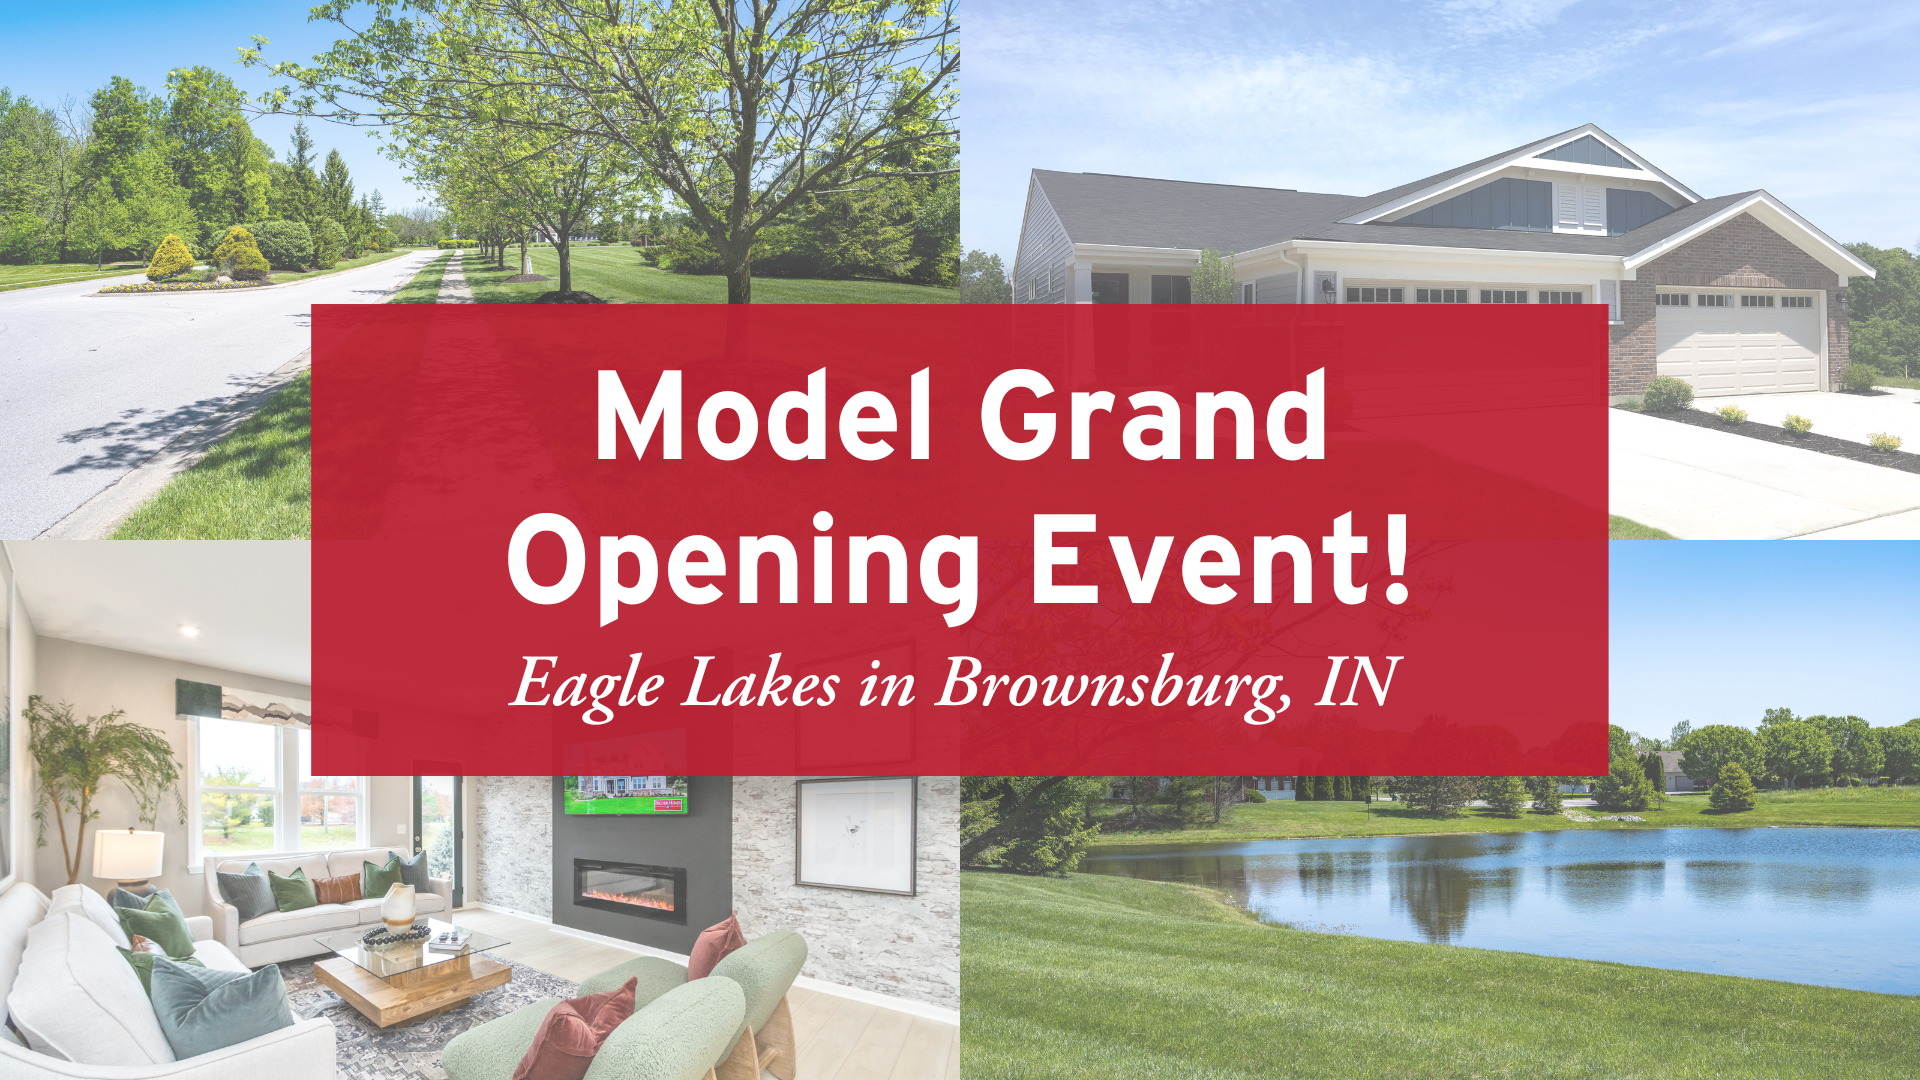 Model Grand Opening Event in Brownsburg, IN!